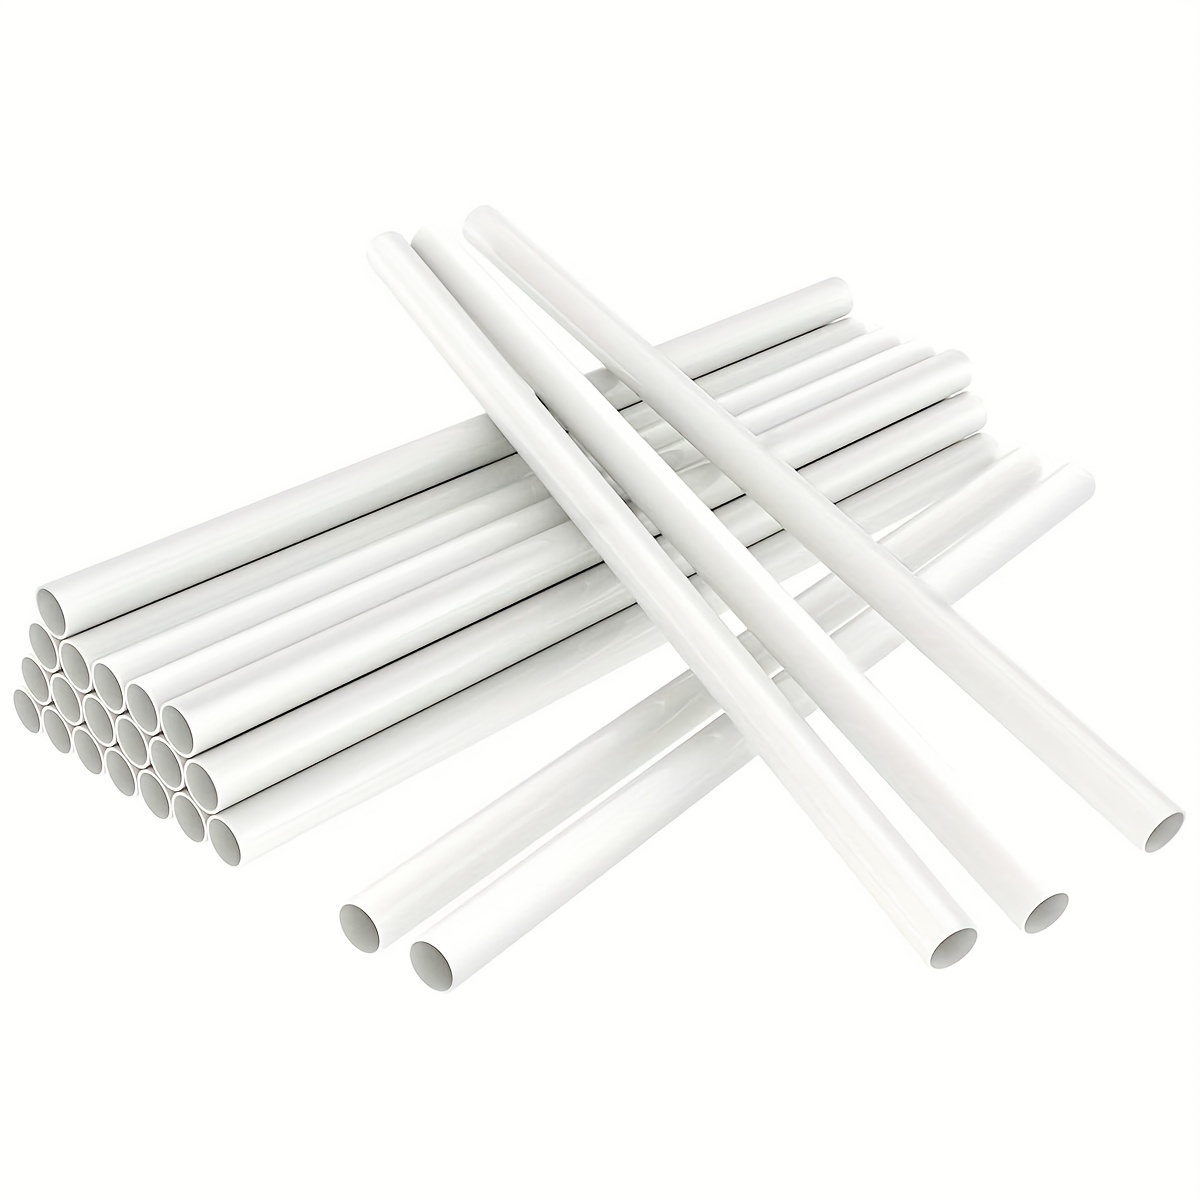 Plastic Cake Dowels for Tiered Cakes - 8inch or 12inch - Baking Rods